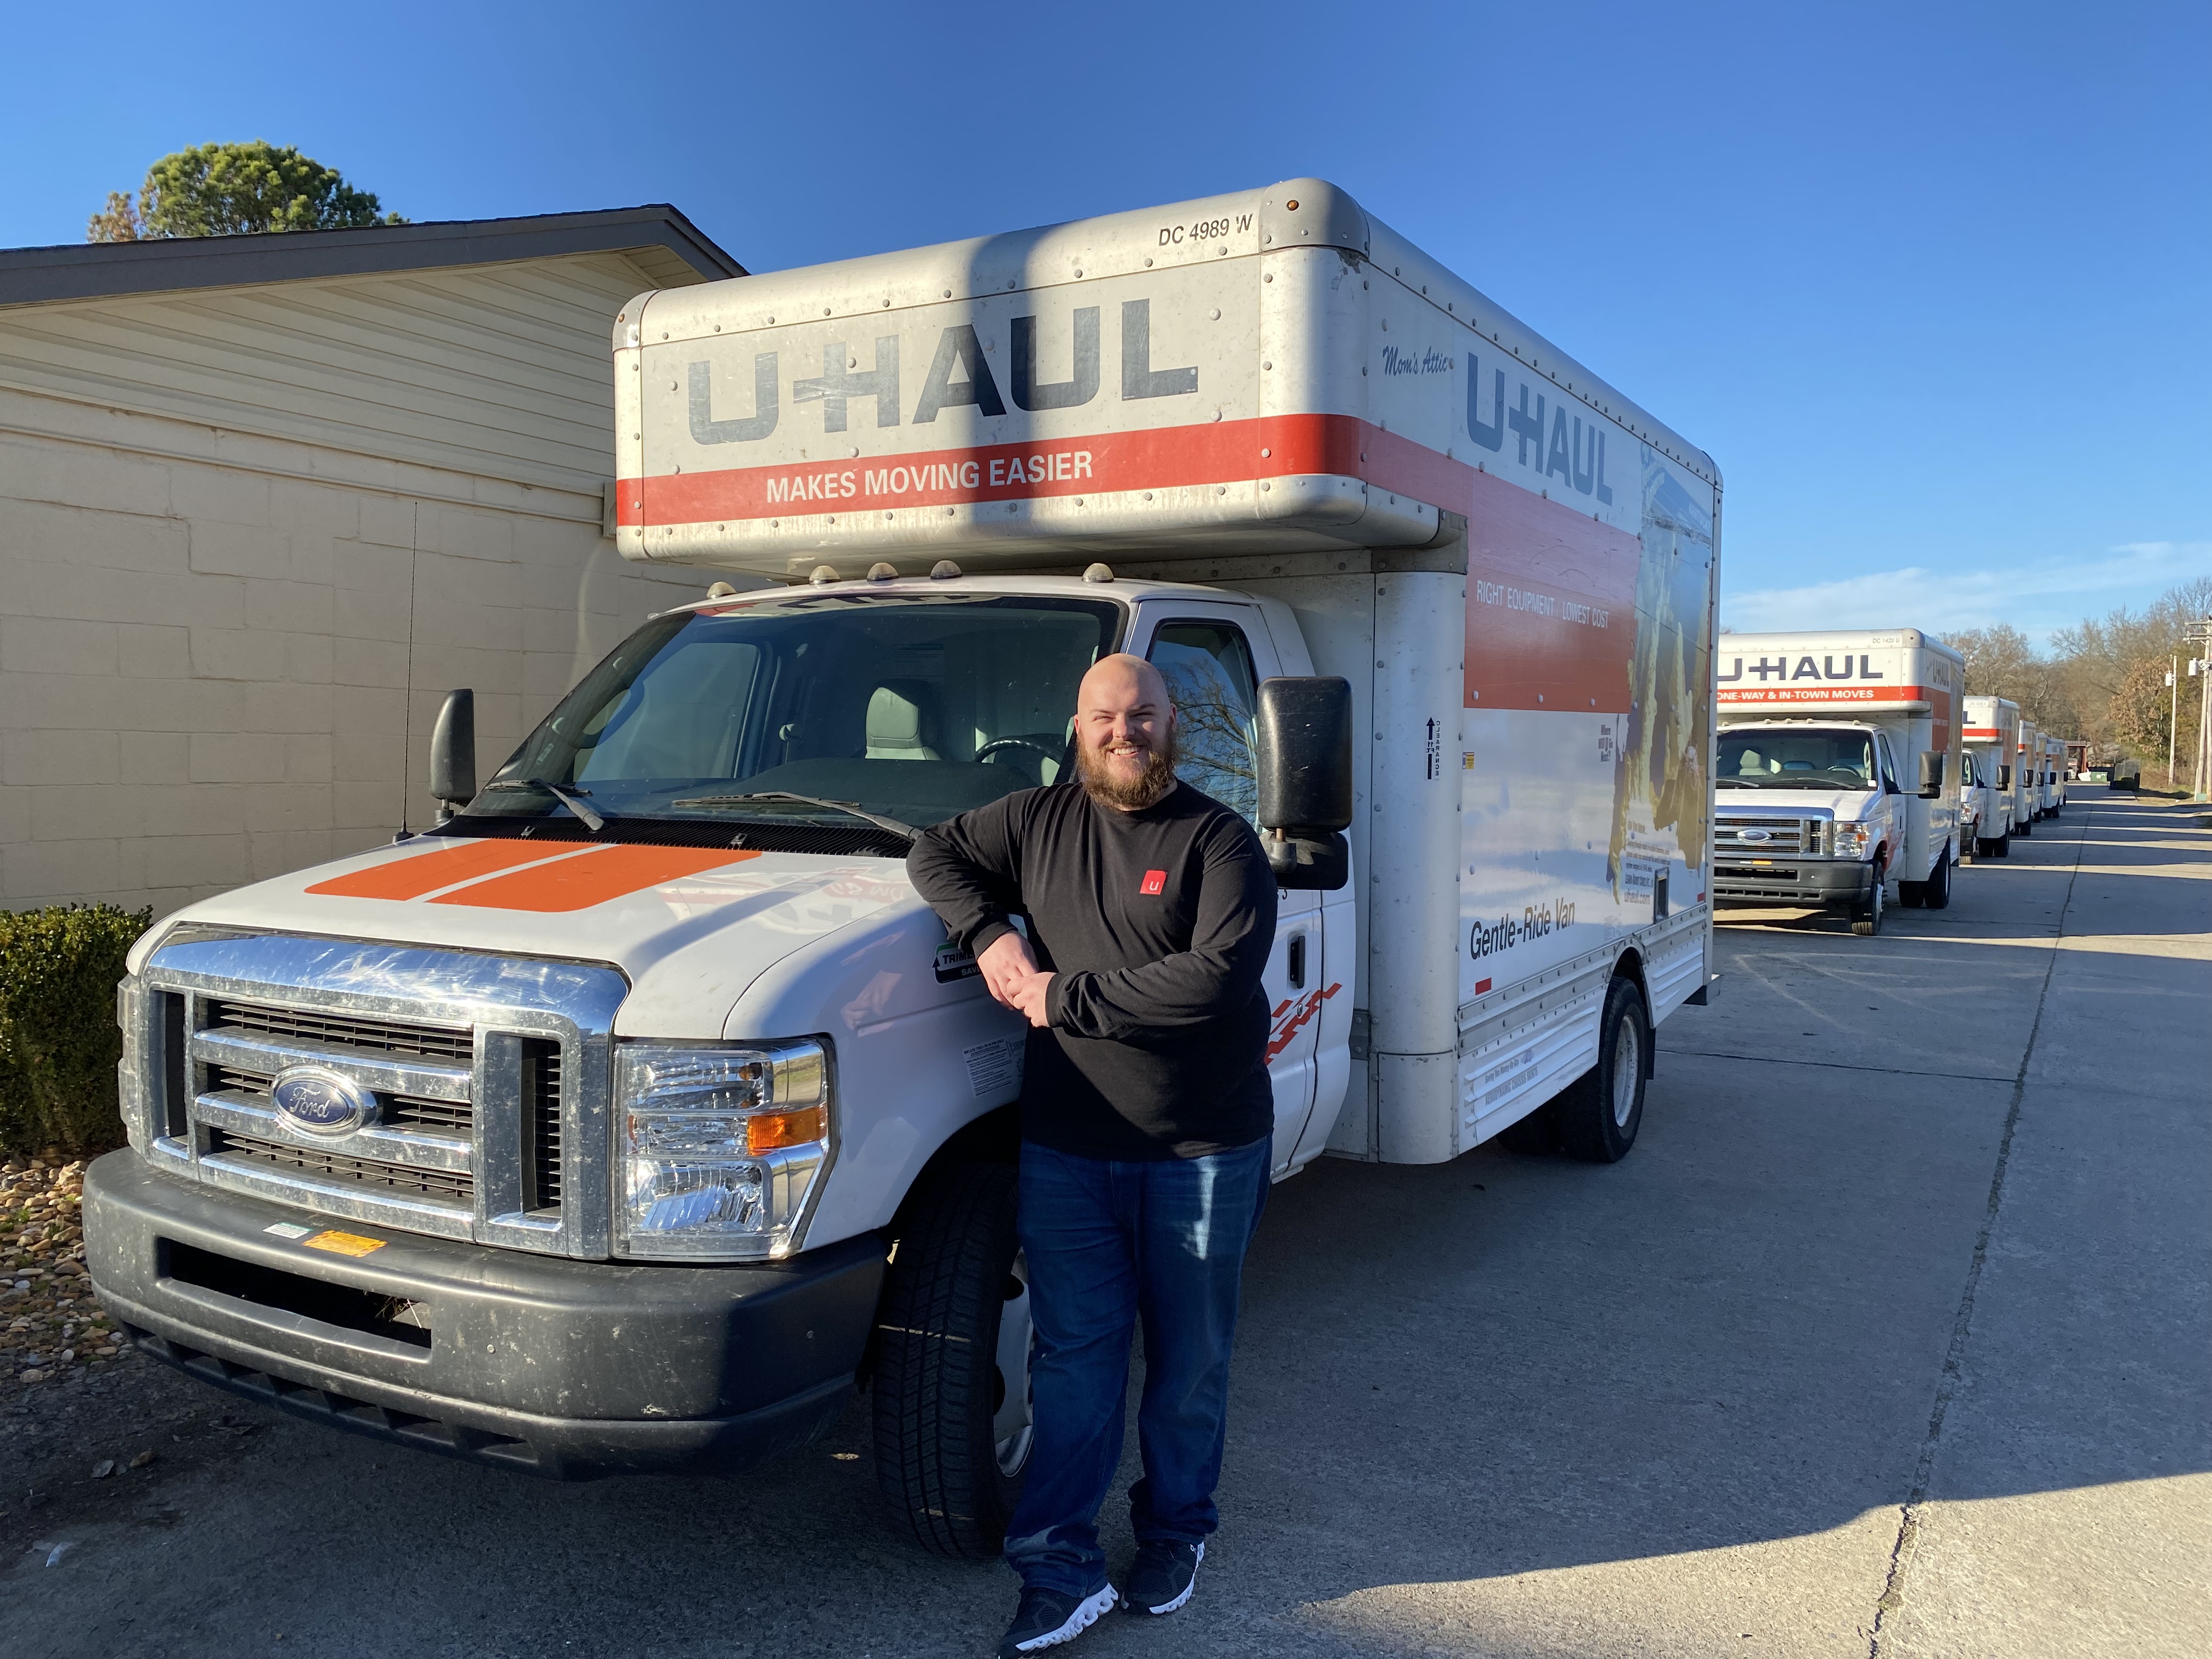 Manager with U haul